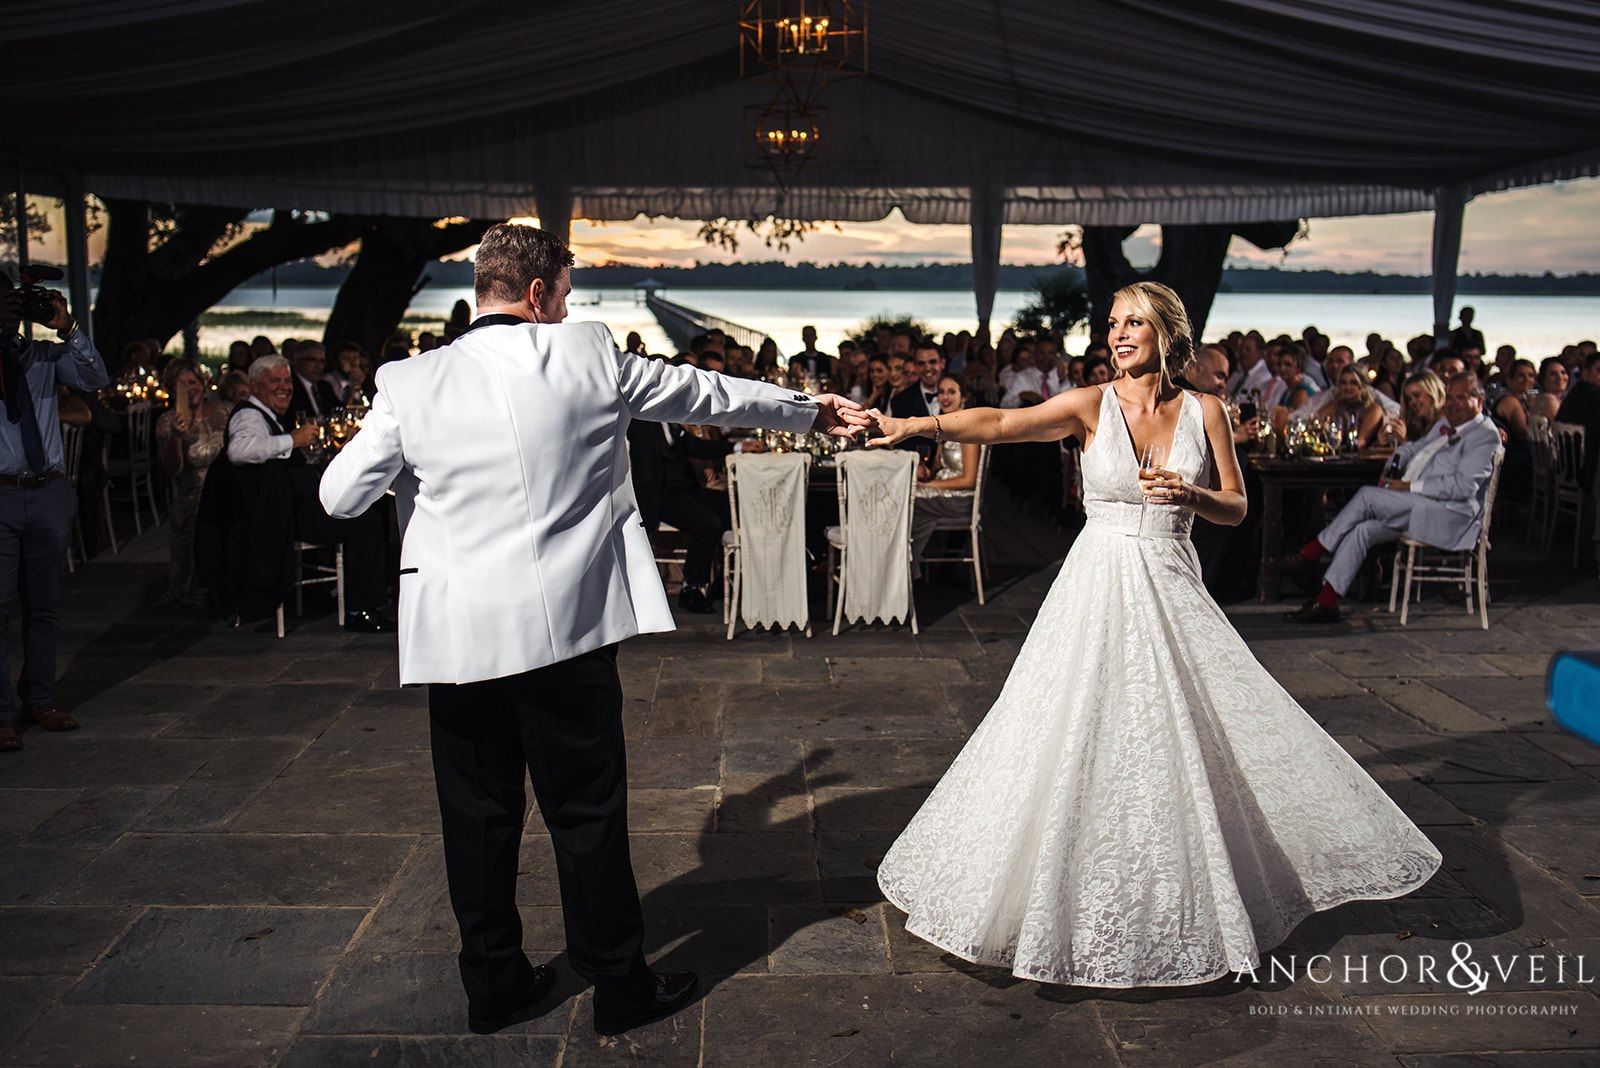 The bride and groom enjoy the dance at the Lowndes Grove Plantation Wedding